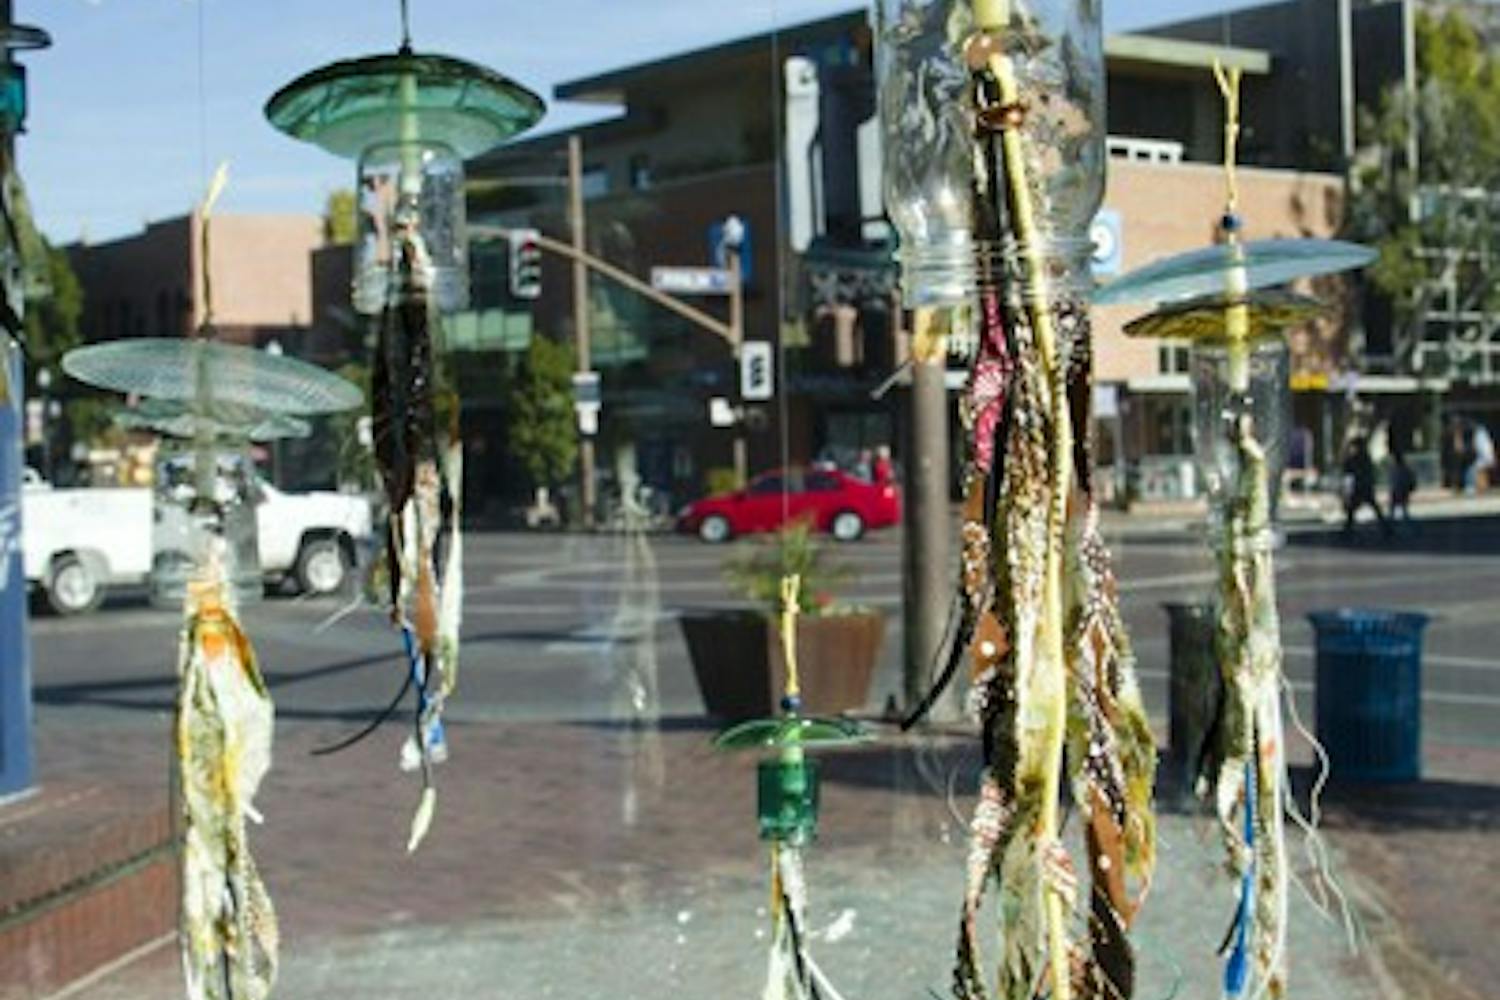 Art sculptures made of recycled materials, including USB cords, wires, glass, and yarn, are on display in the windows of the US Post Office on Mill Avenue as part of Tempe Green Revolution. (Photo by Ana Ramirez)